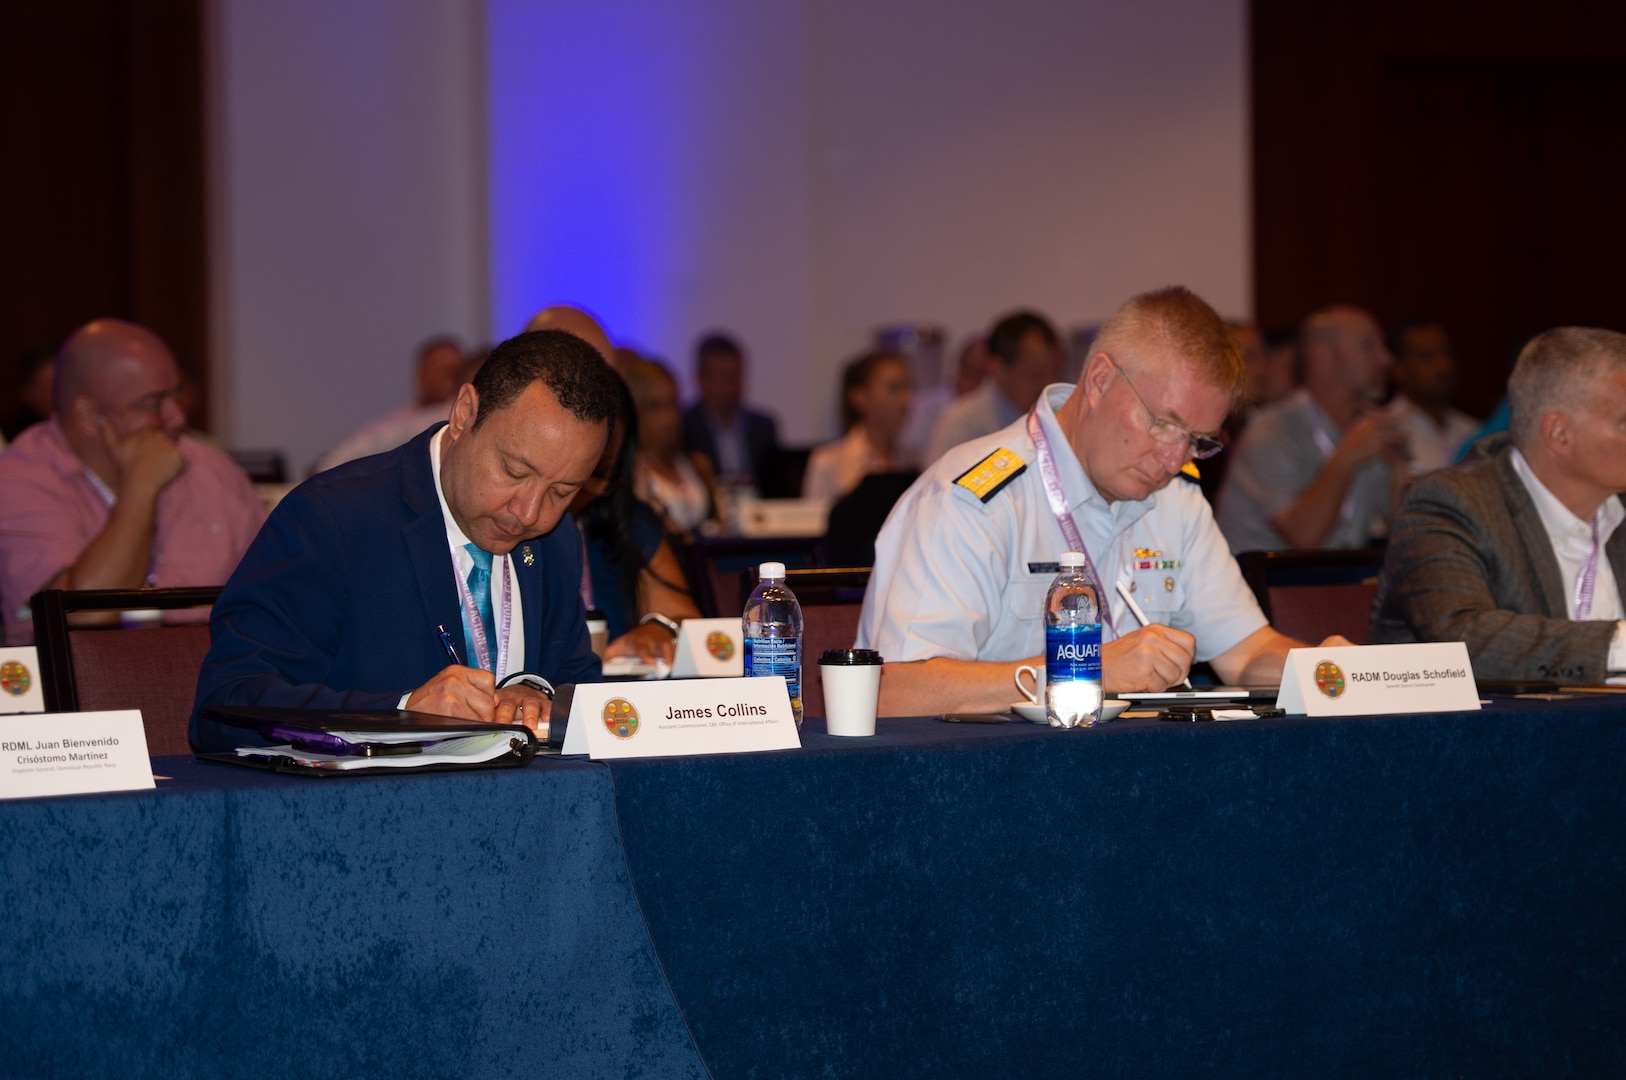 The U.S. Customs and Border Protection Office of International Affairs Assistant Commissioner James Collins, left, and the U.S. Coast Guard Seventh District Commander Rear Adm. Douglas Schofield, right, participate in the Eastern Caribbean Combined Coordination Group (ECCG) meeting April 23-25, in San Juan, Puerto Rico. The ECCG is comprised of U.S. interagency and international partners with diverse expertise and authorities necessary to deepen cooperation across myriad jurisdictions and against a broad spectrum of threats and challenges in Eastern Caribbean region.